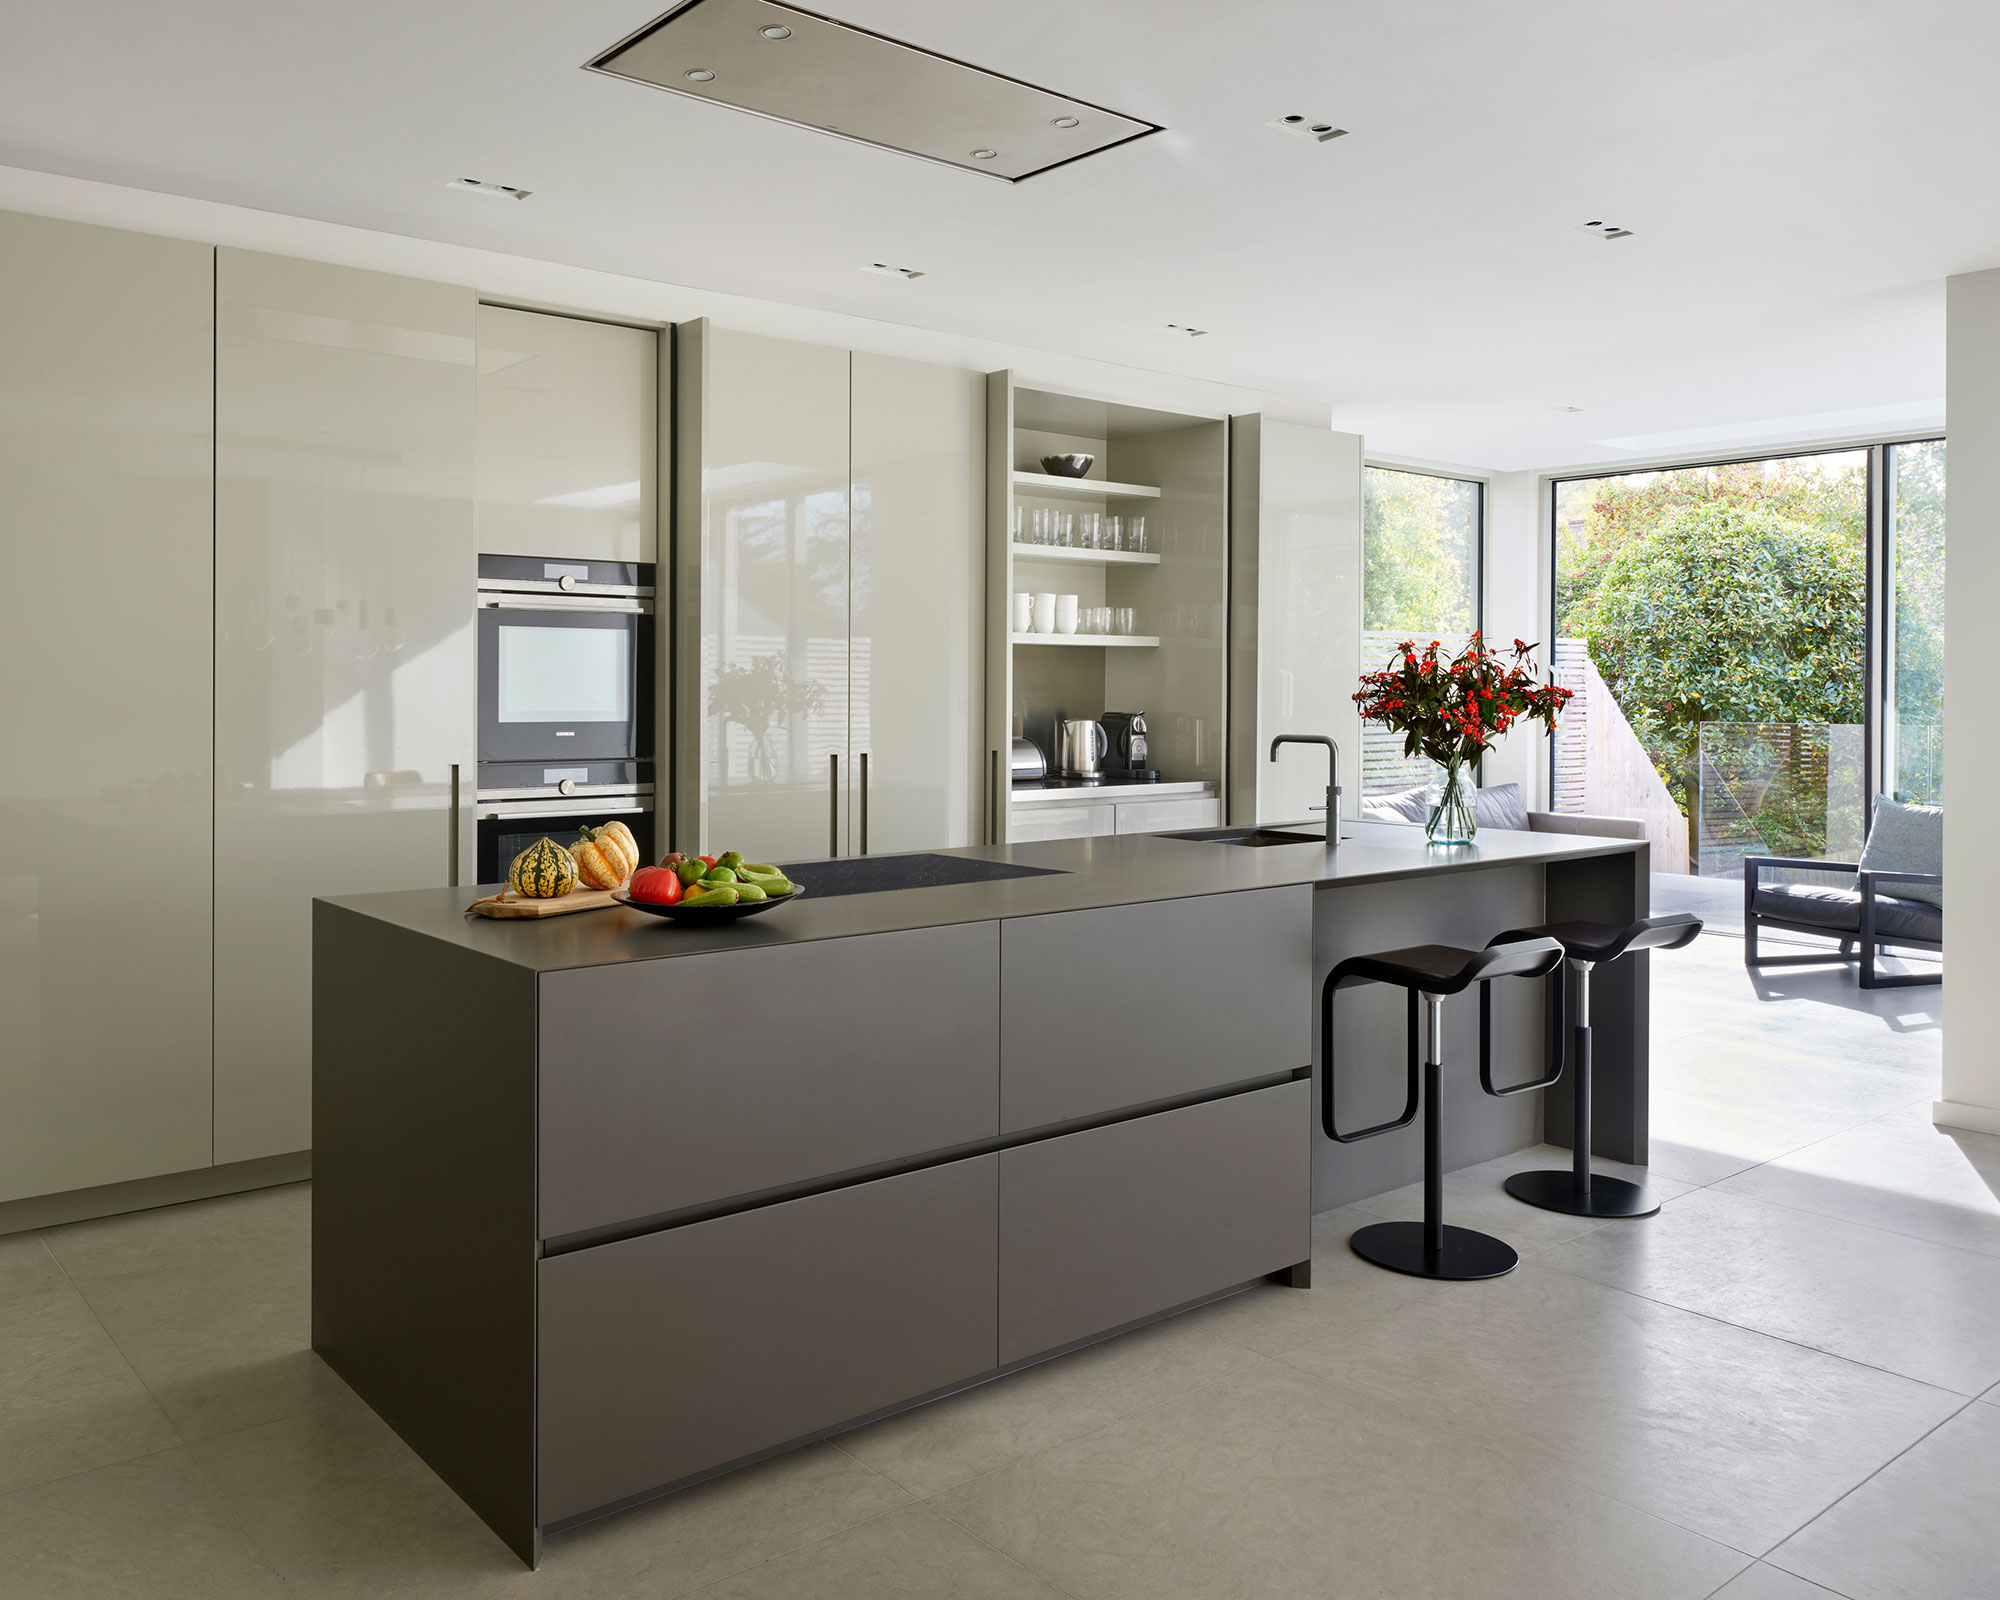 How to design a modern kitchen: create a sleek contemporary room ...